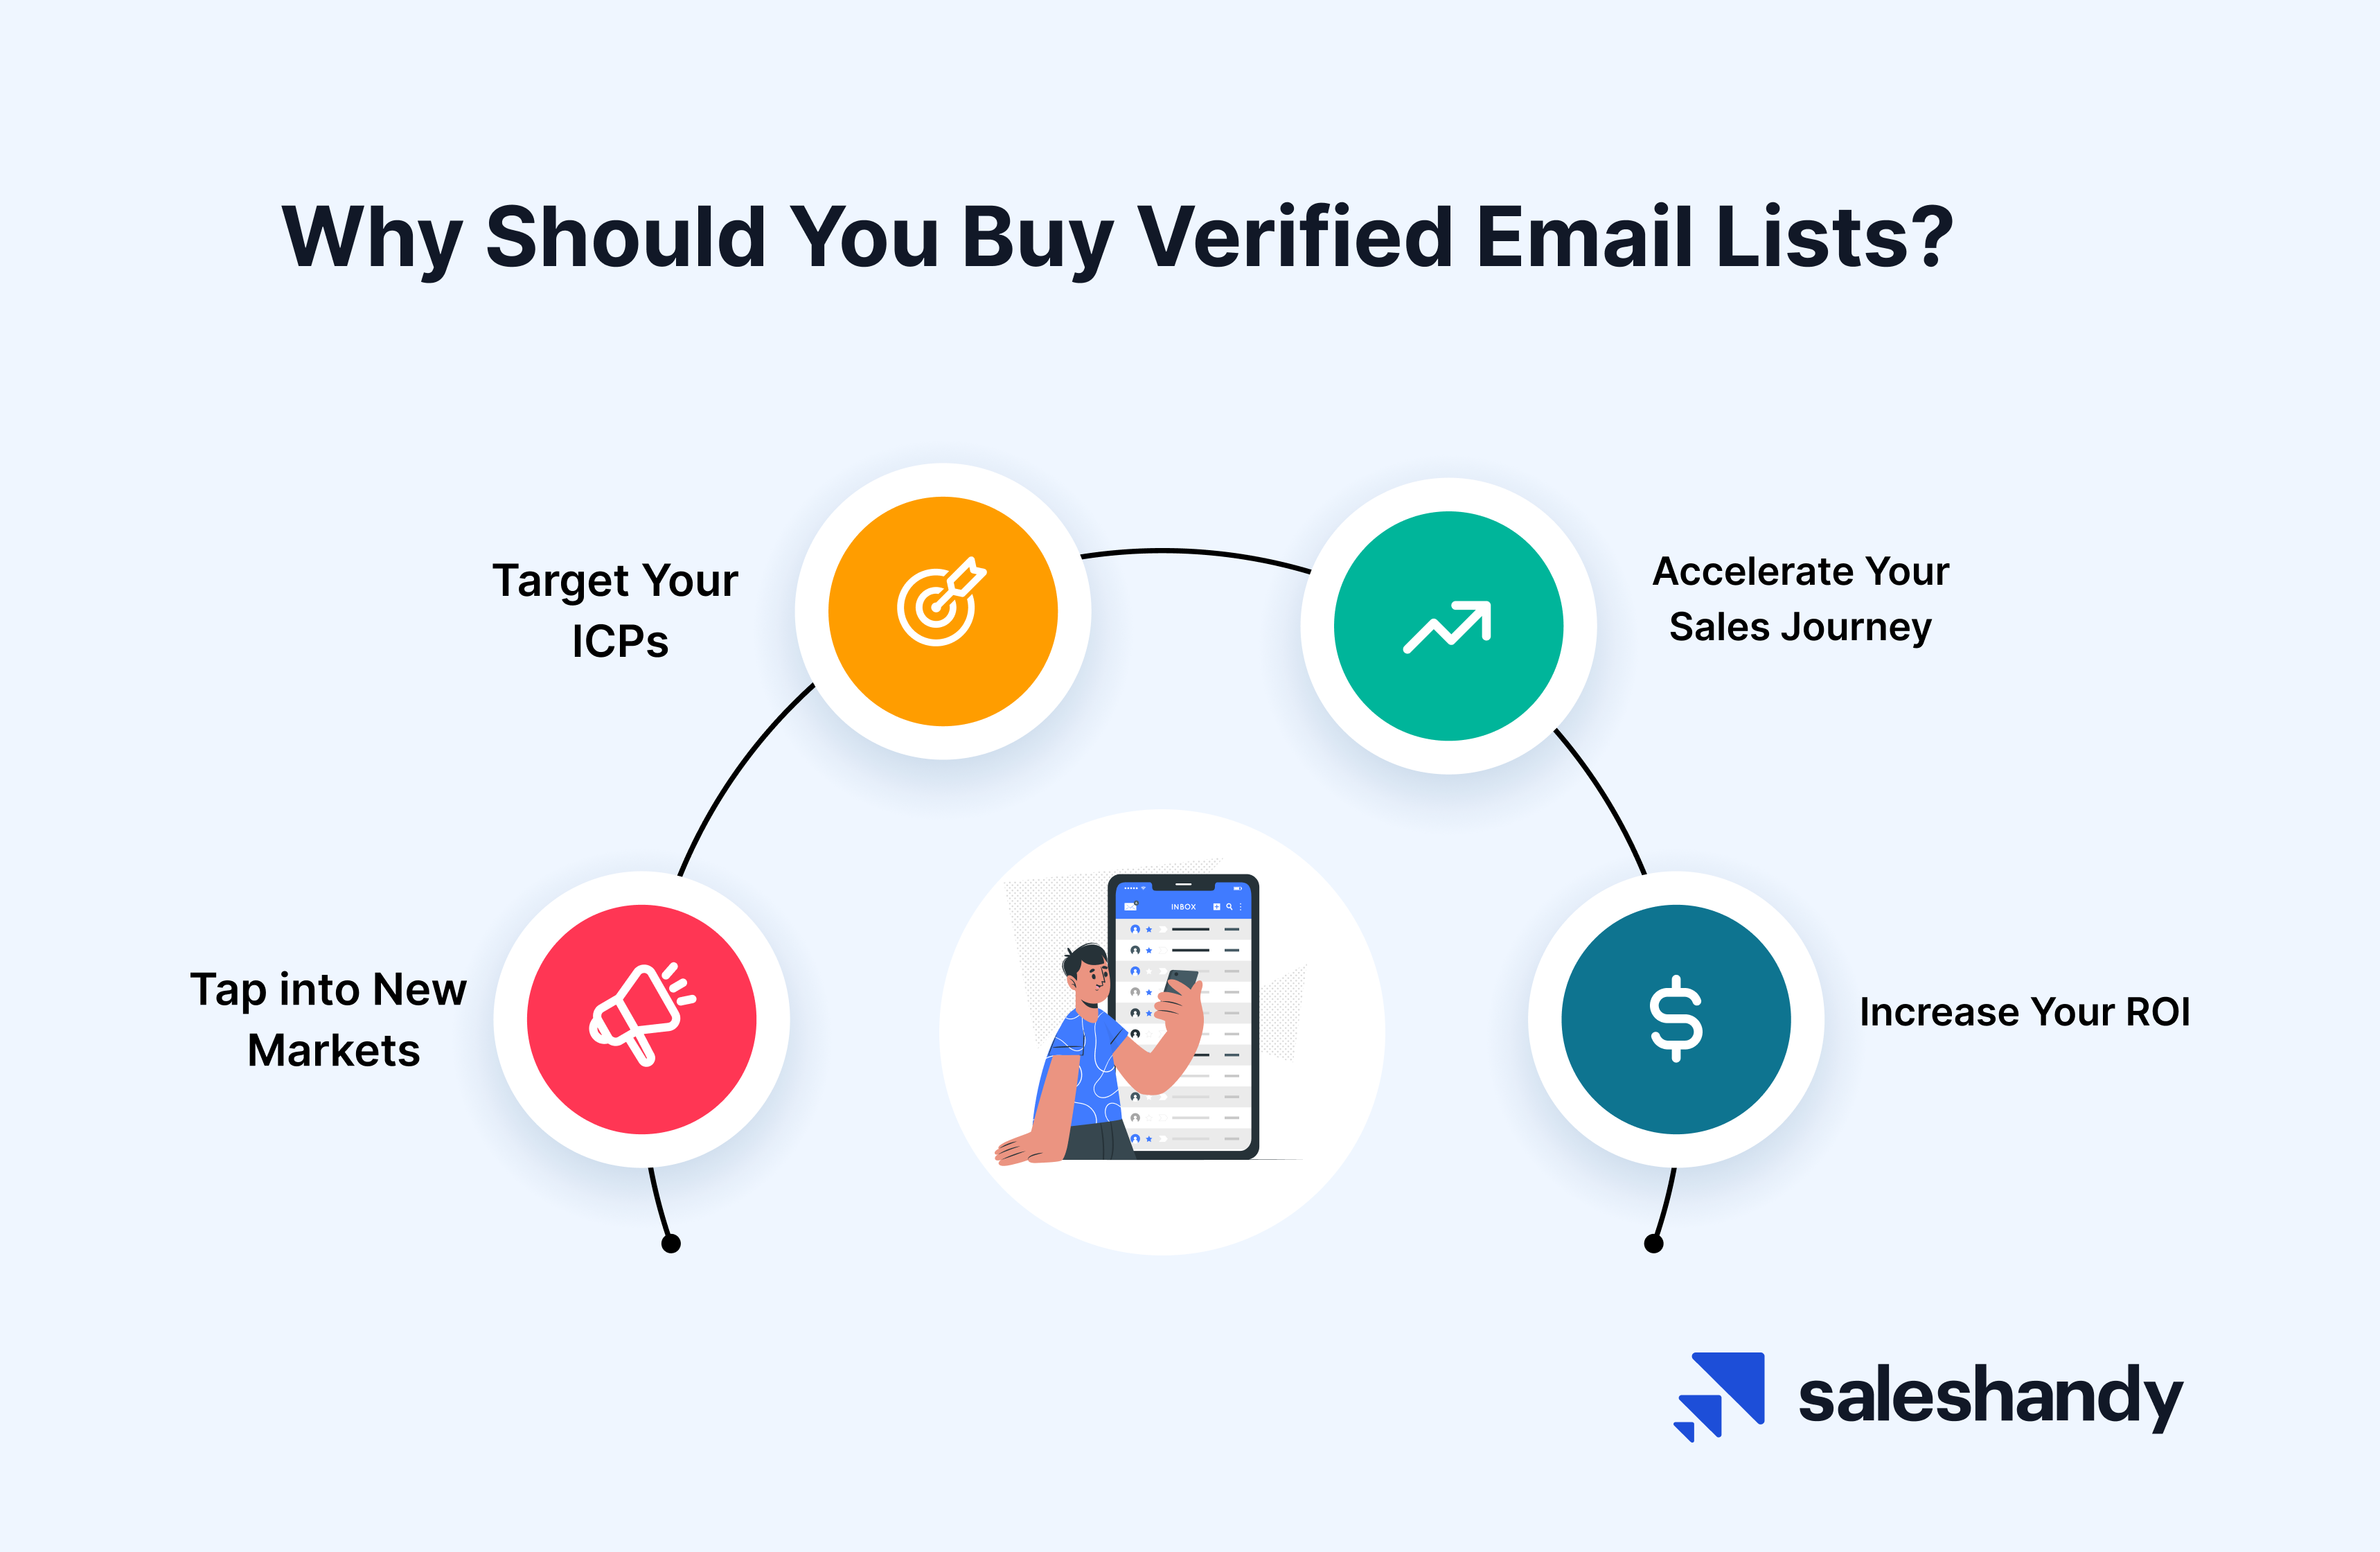 Why should you buy verified email lists